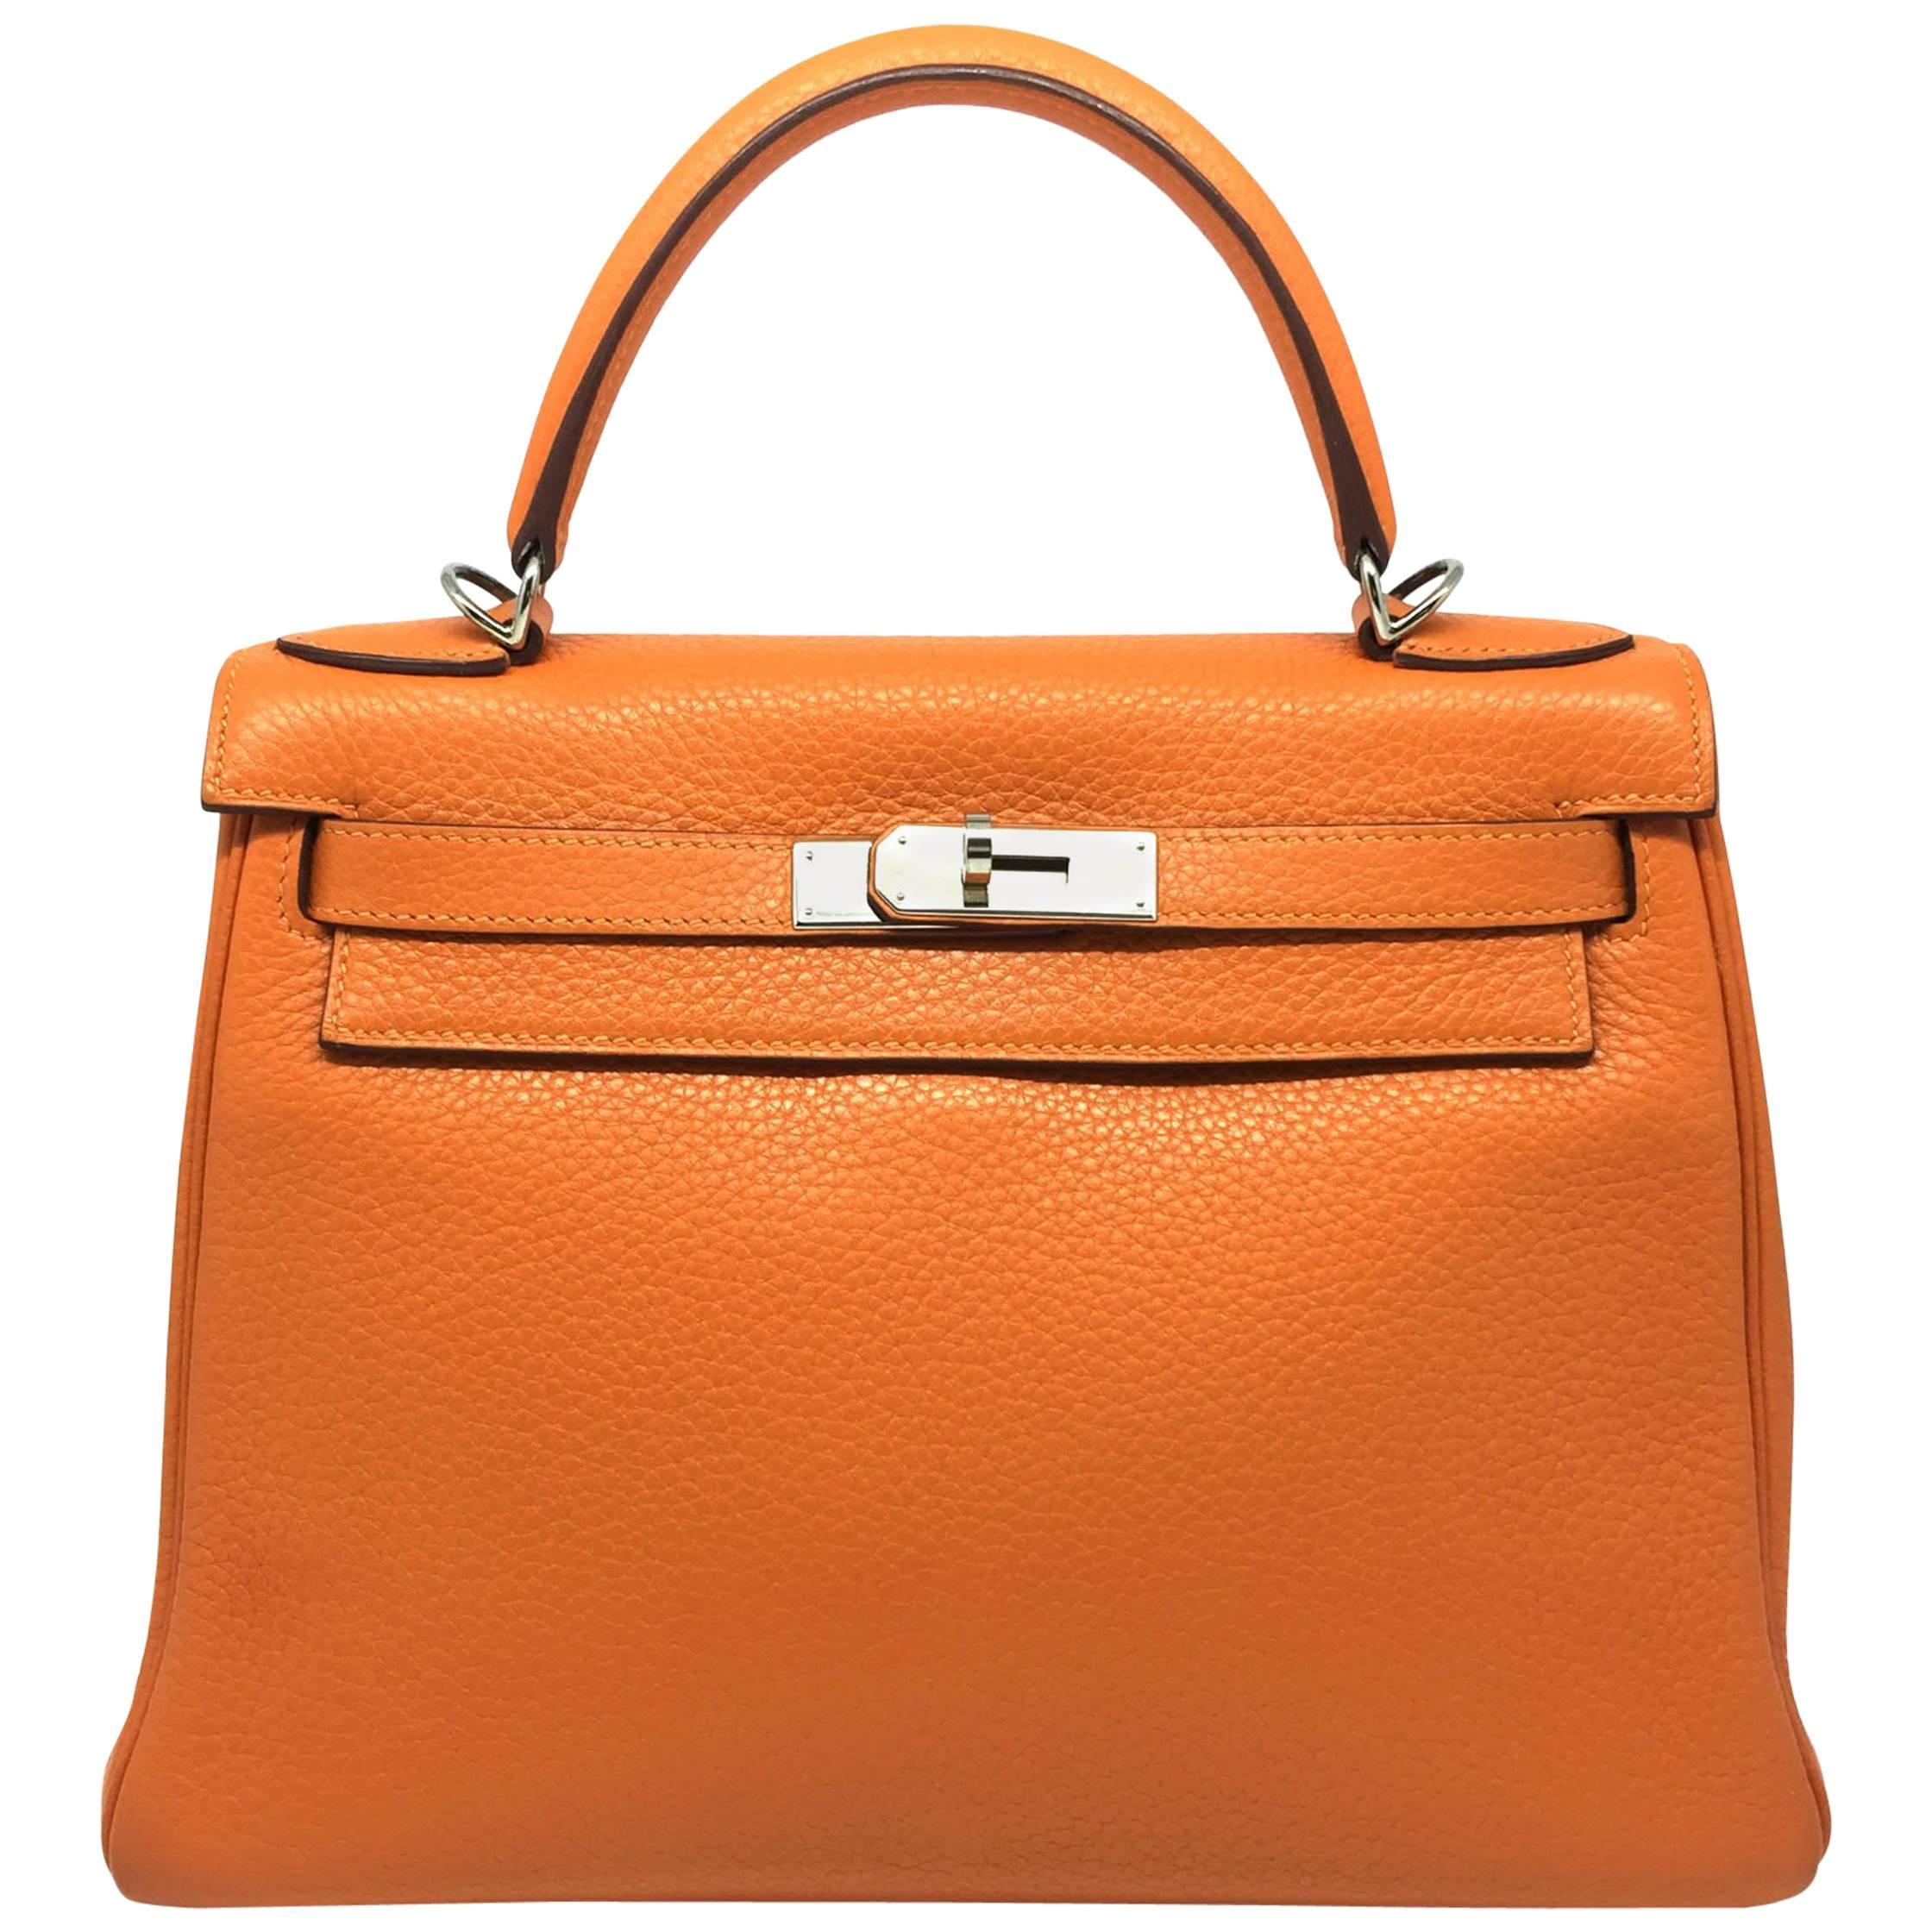 Hermes Kelly 32 Orange Iris Clemence Leather SHW Top Handle Bag For Sale